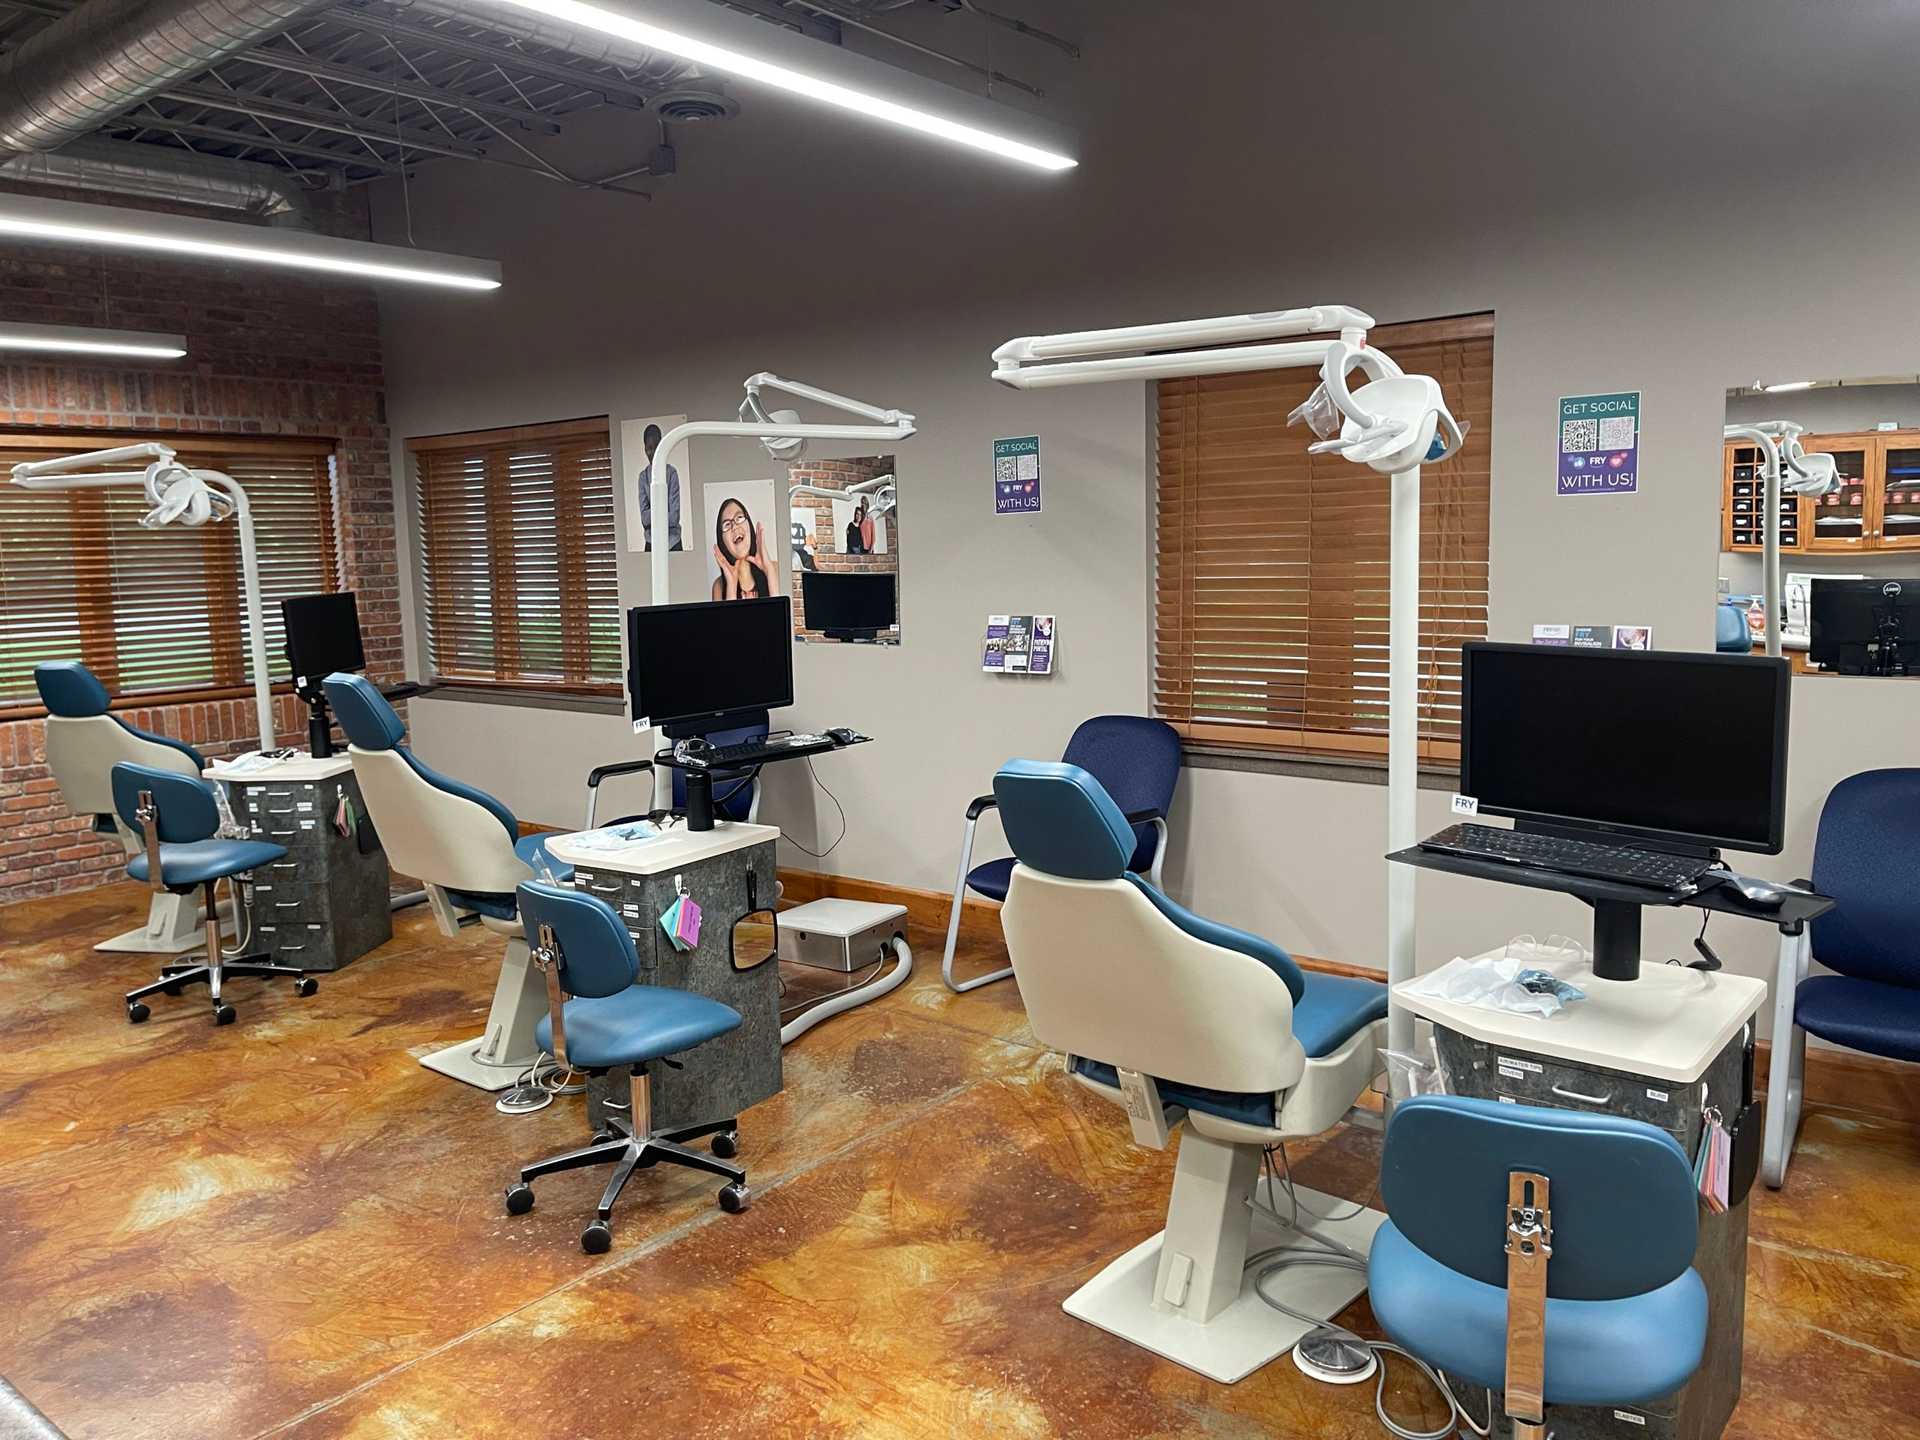 Room with patient chairs and computers